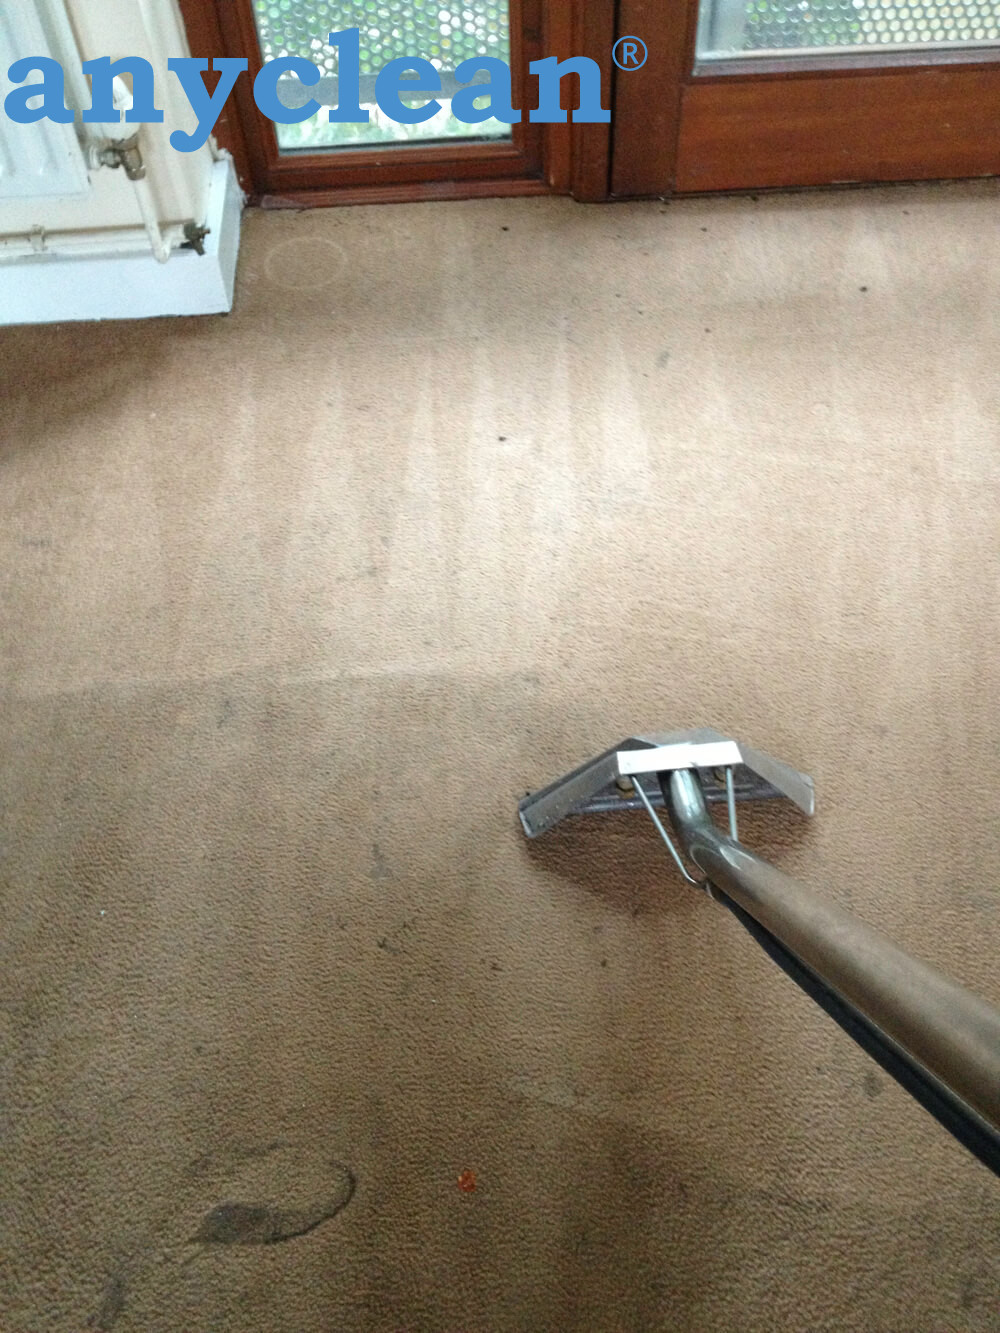 Highly effective carpet steam washing in the vicinity of GWGC R9 London, United Kingdom